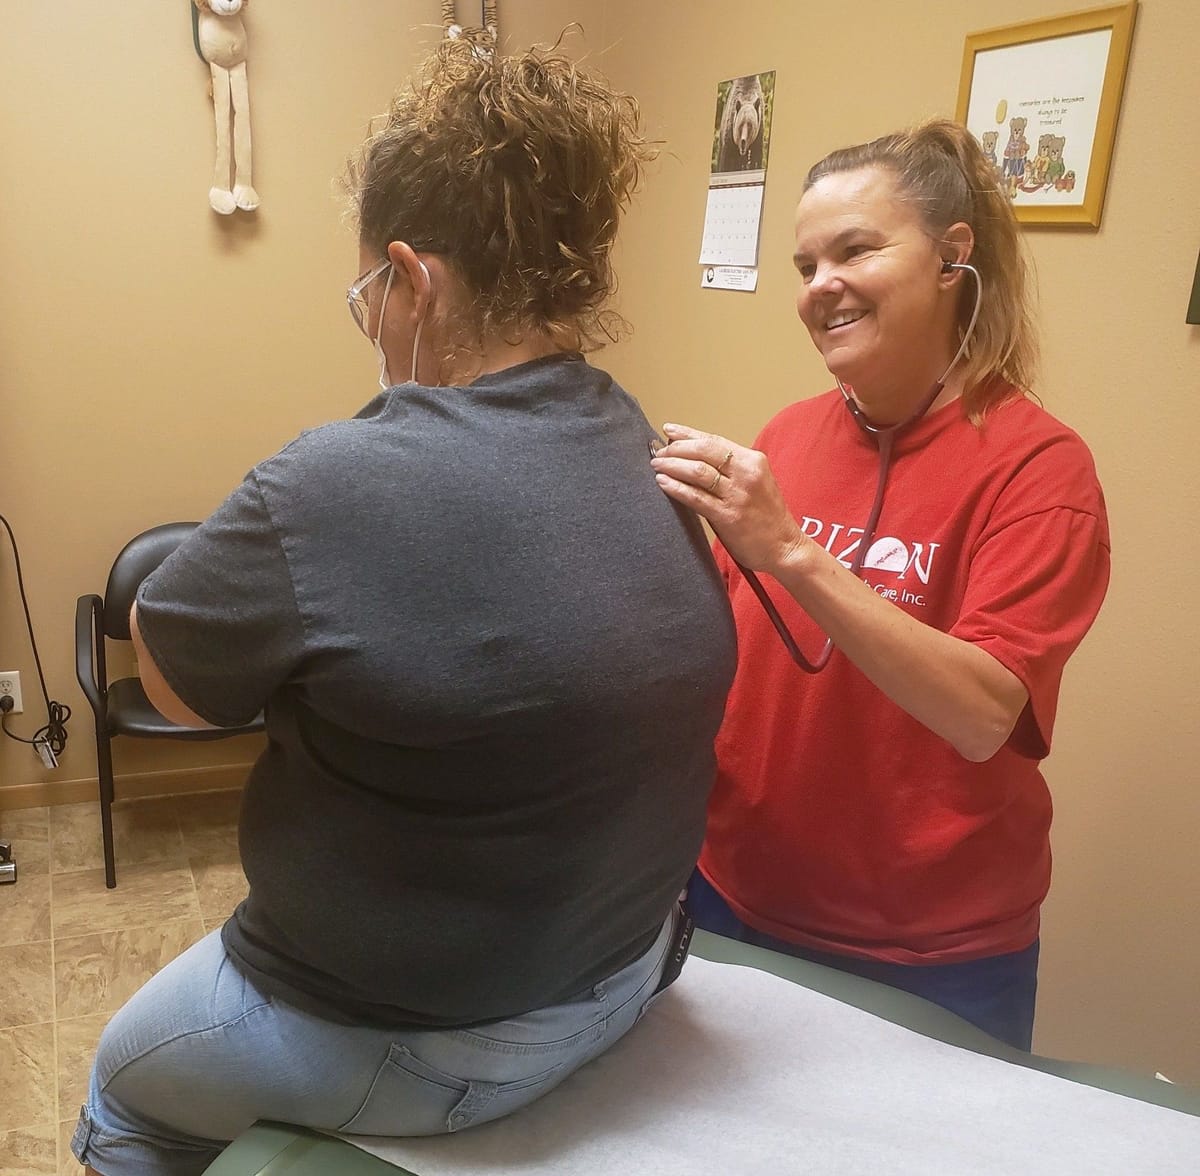 South Dakota’s high health care costs causing many to skip treatments